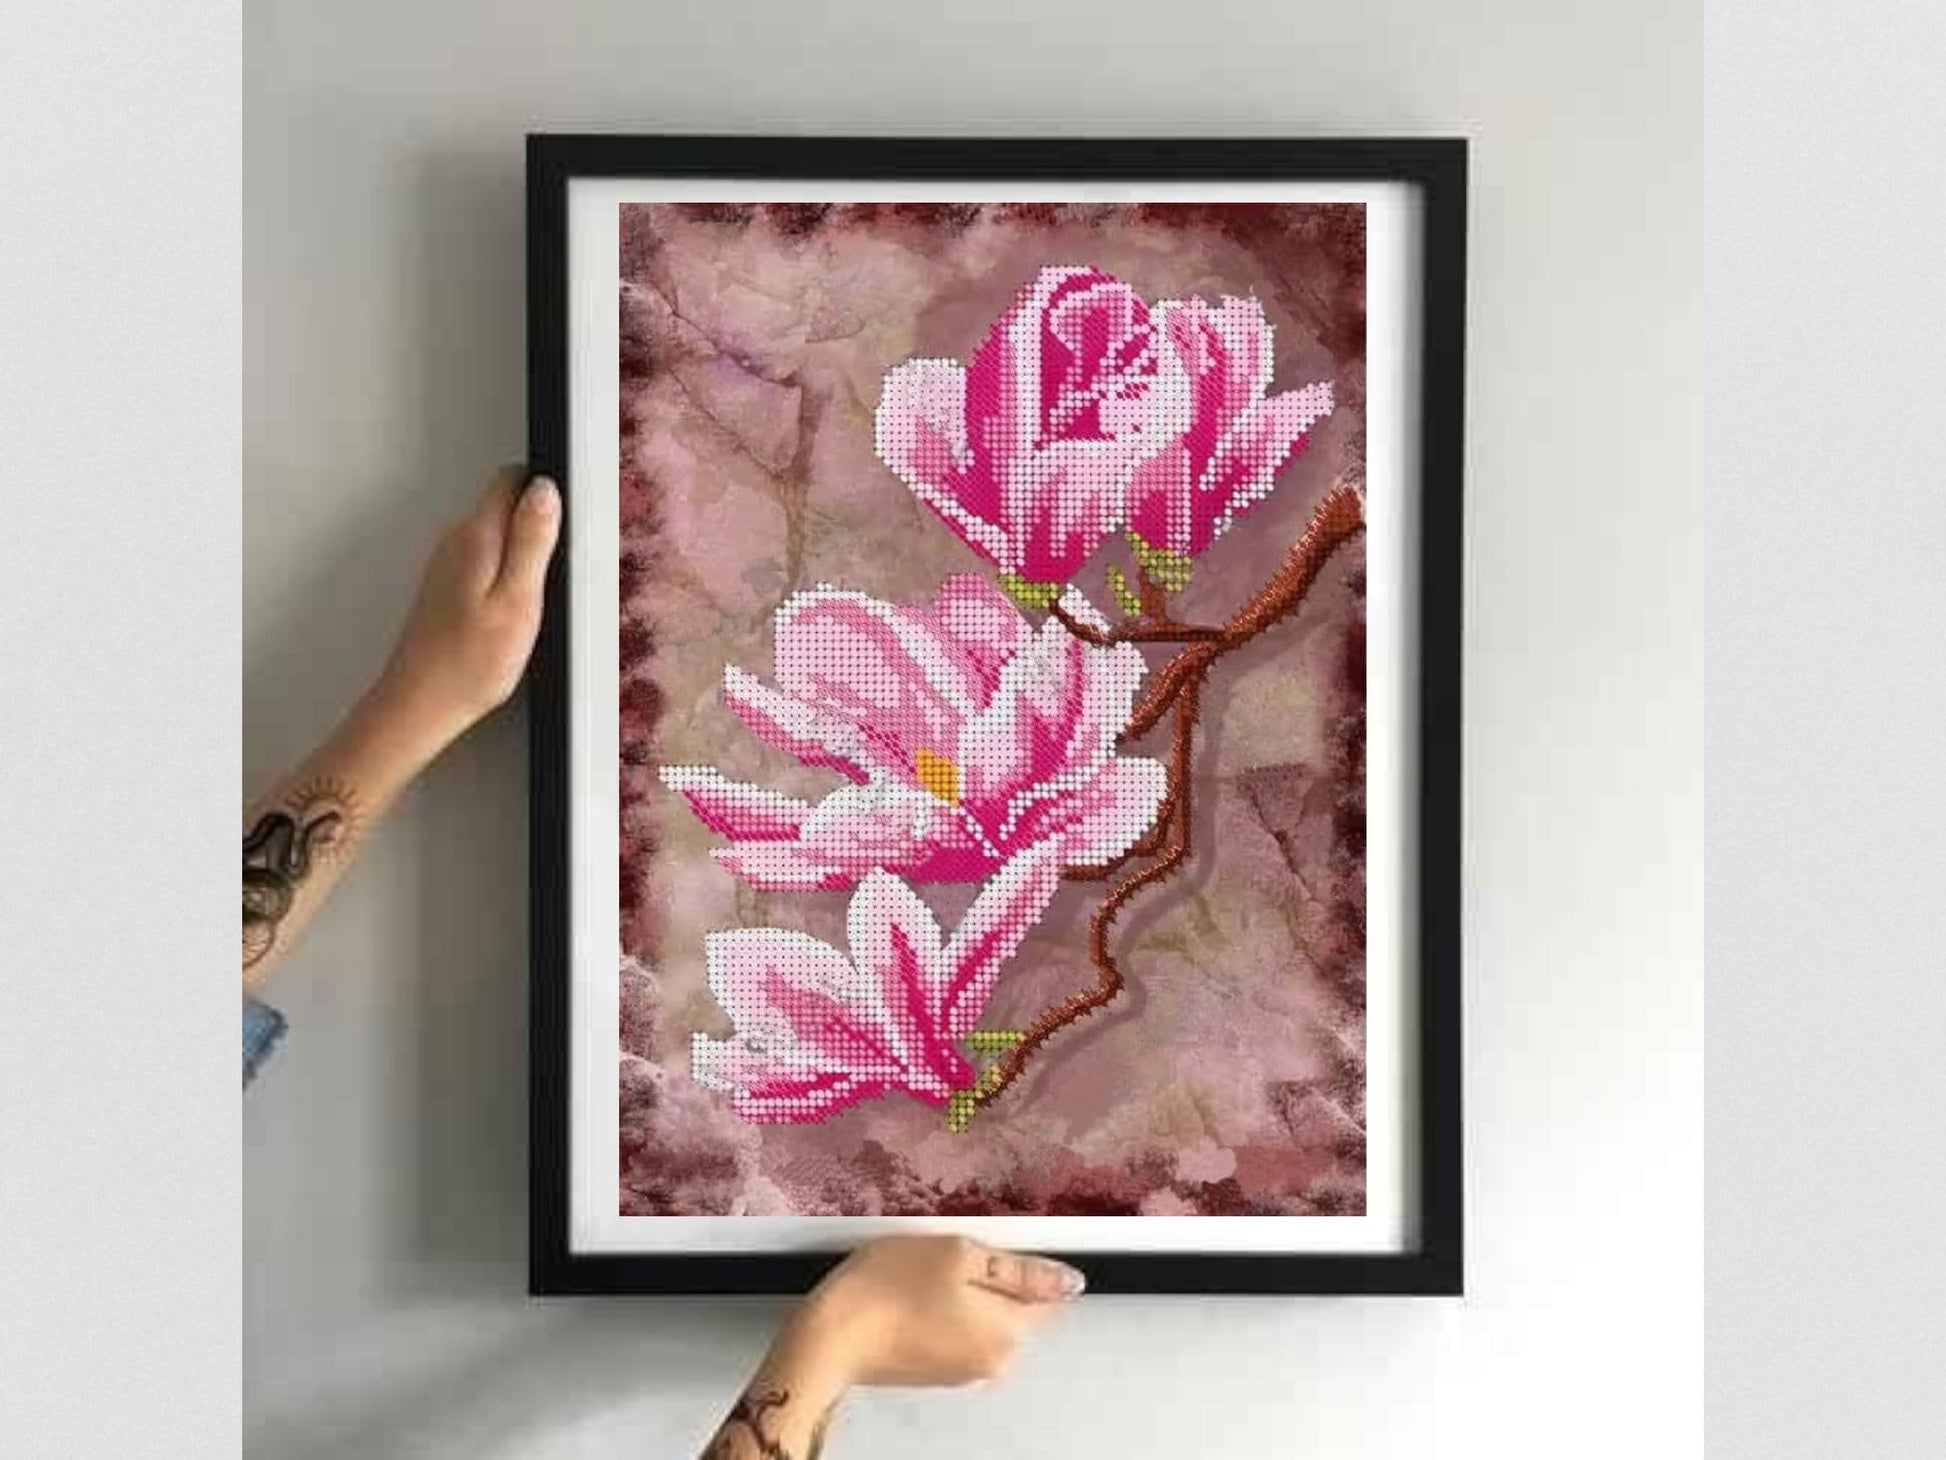 Bead Embroidery Kit featuring Exquisite Magnolia Pattern - Craft Your Own Stunning Accessories Size: 8.3-11.8in (21-30cm) - VadymShop